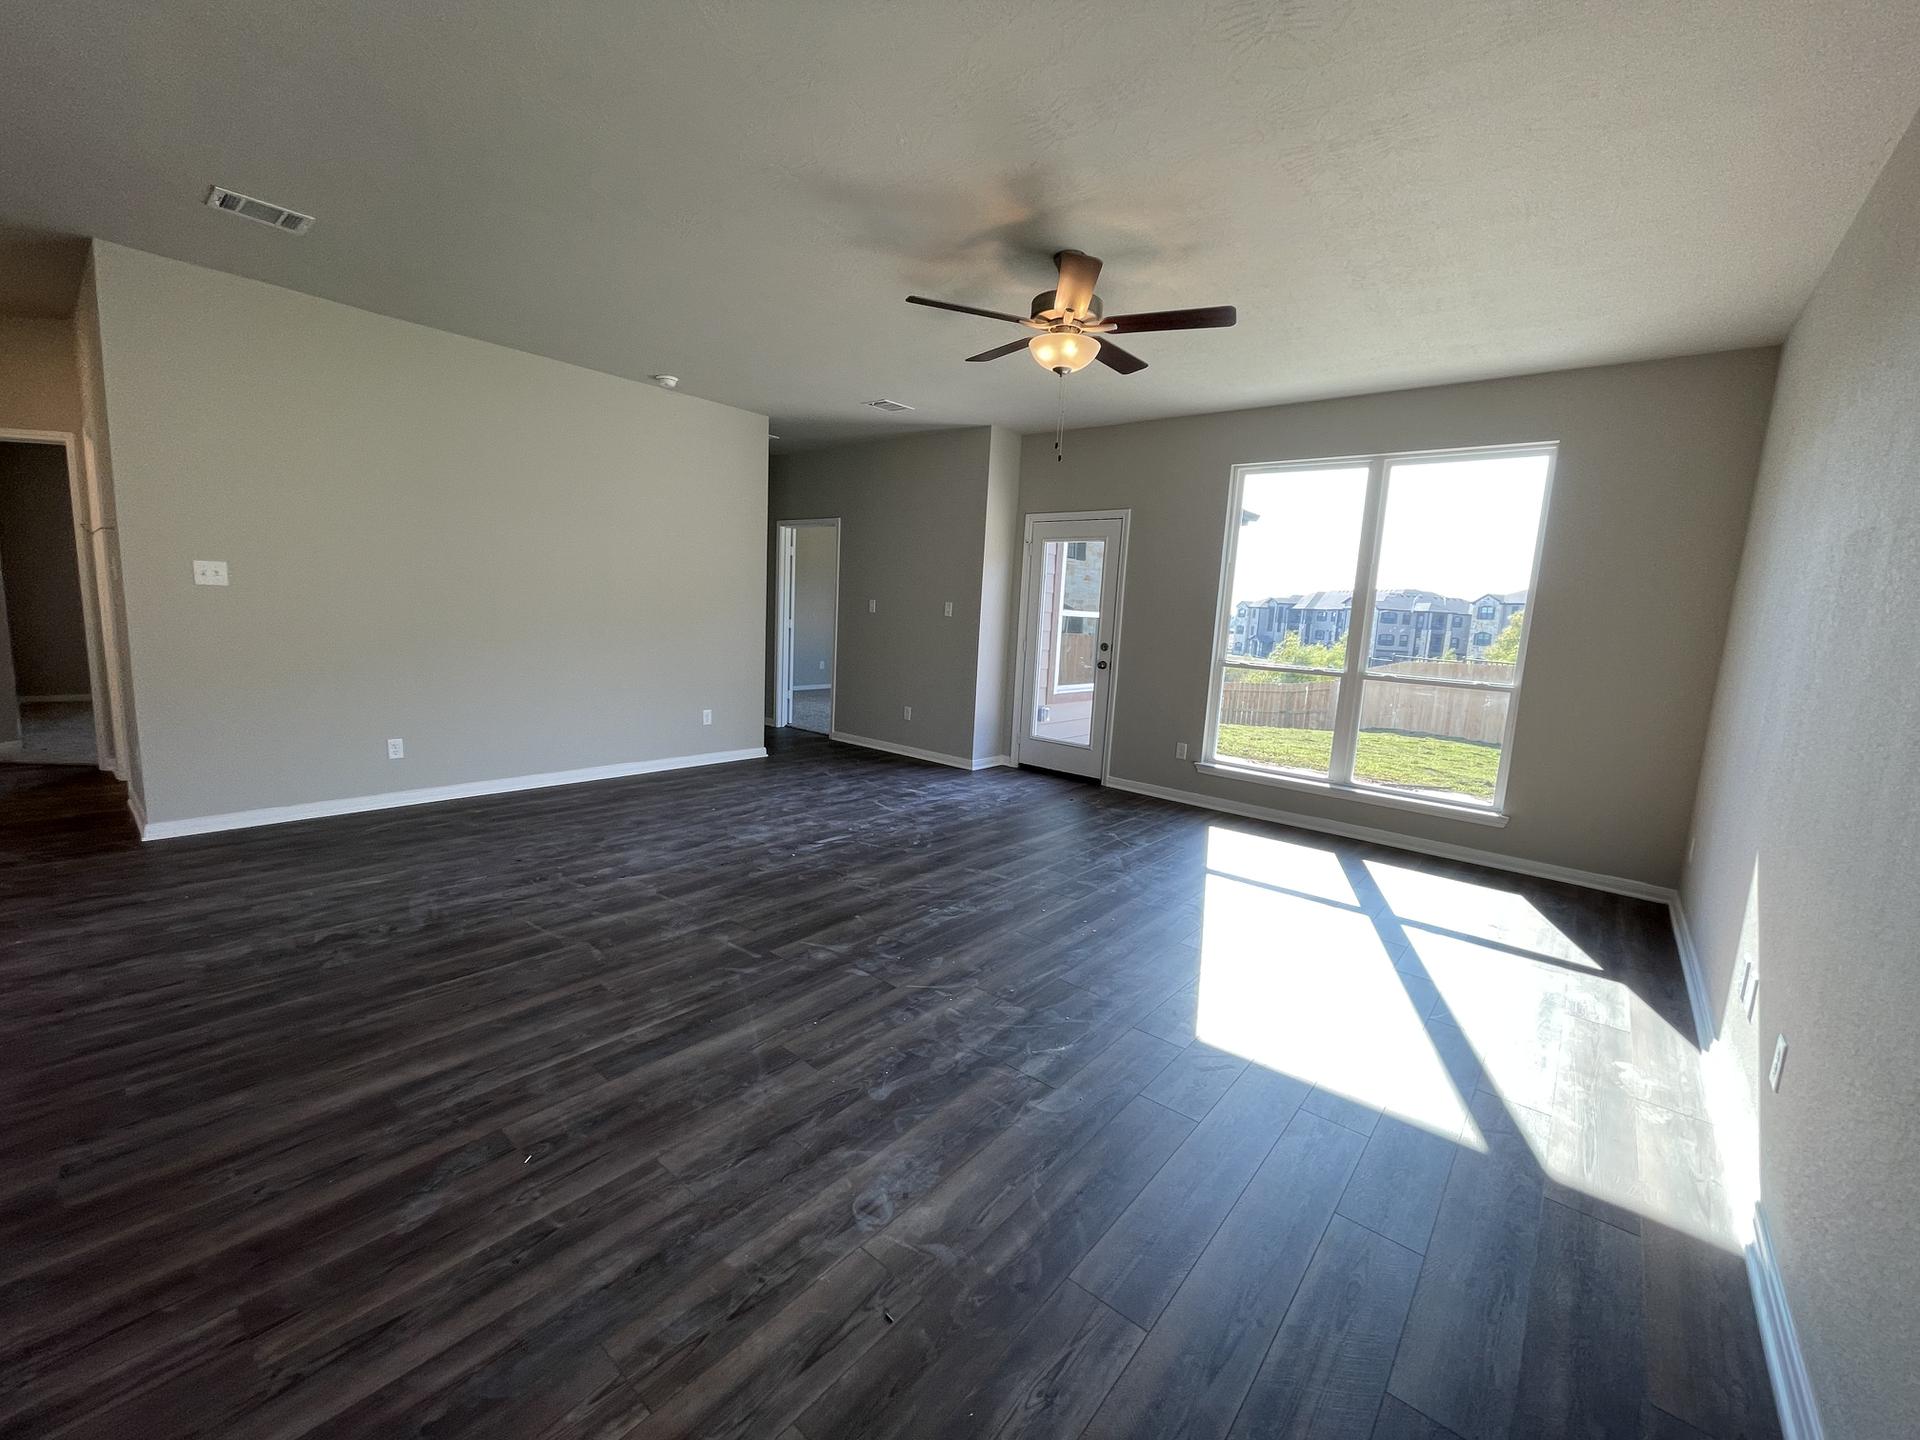 1,841sf New Home in Montgomery, TX